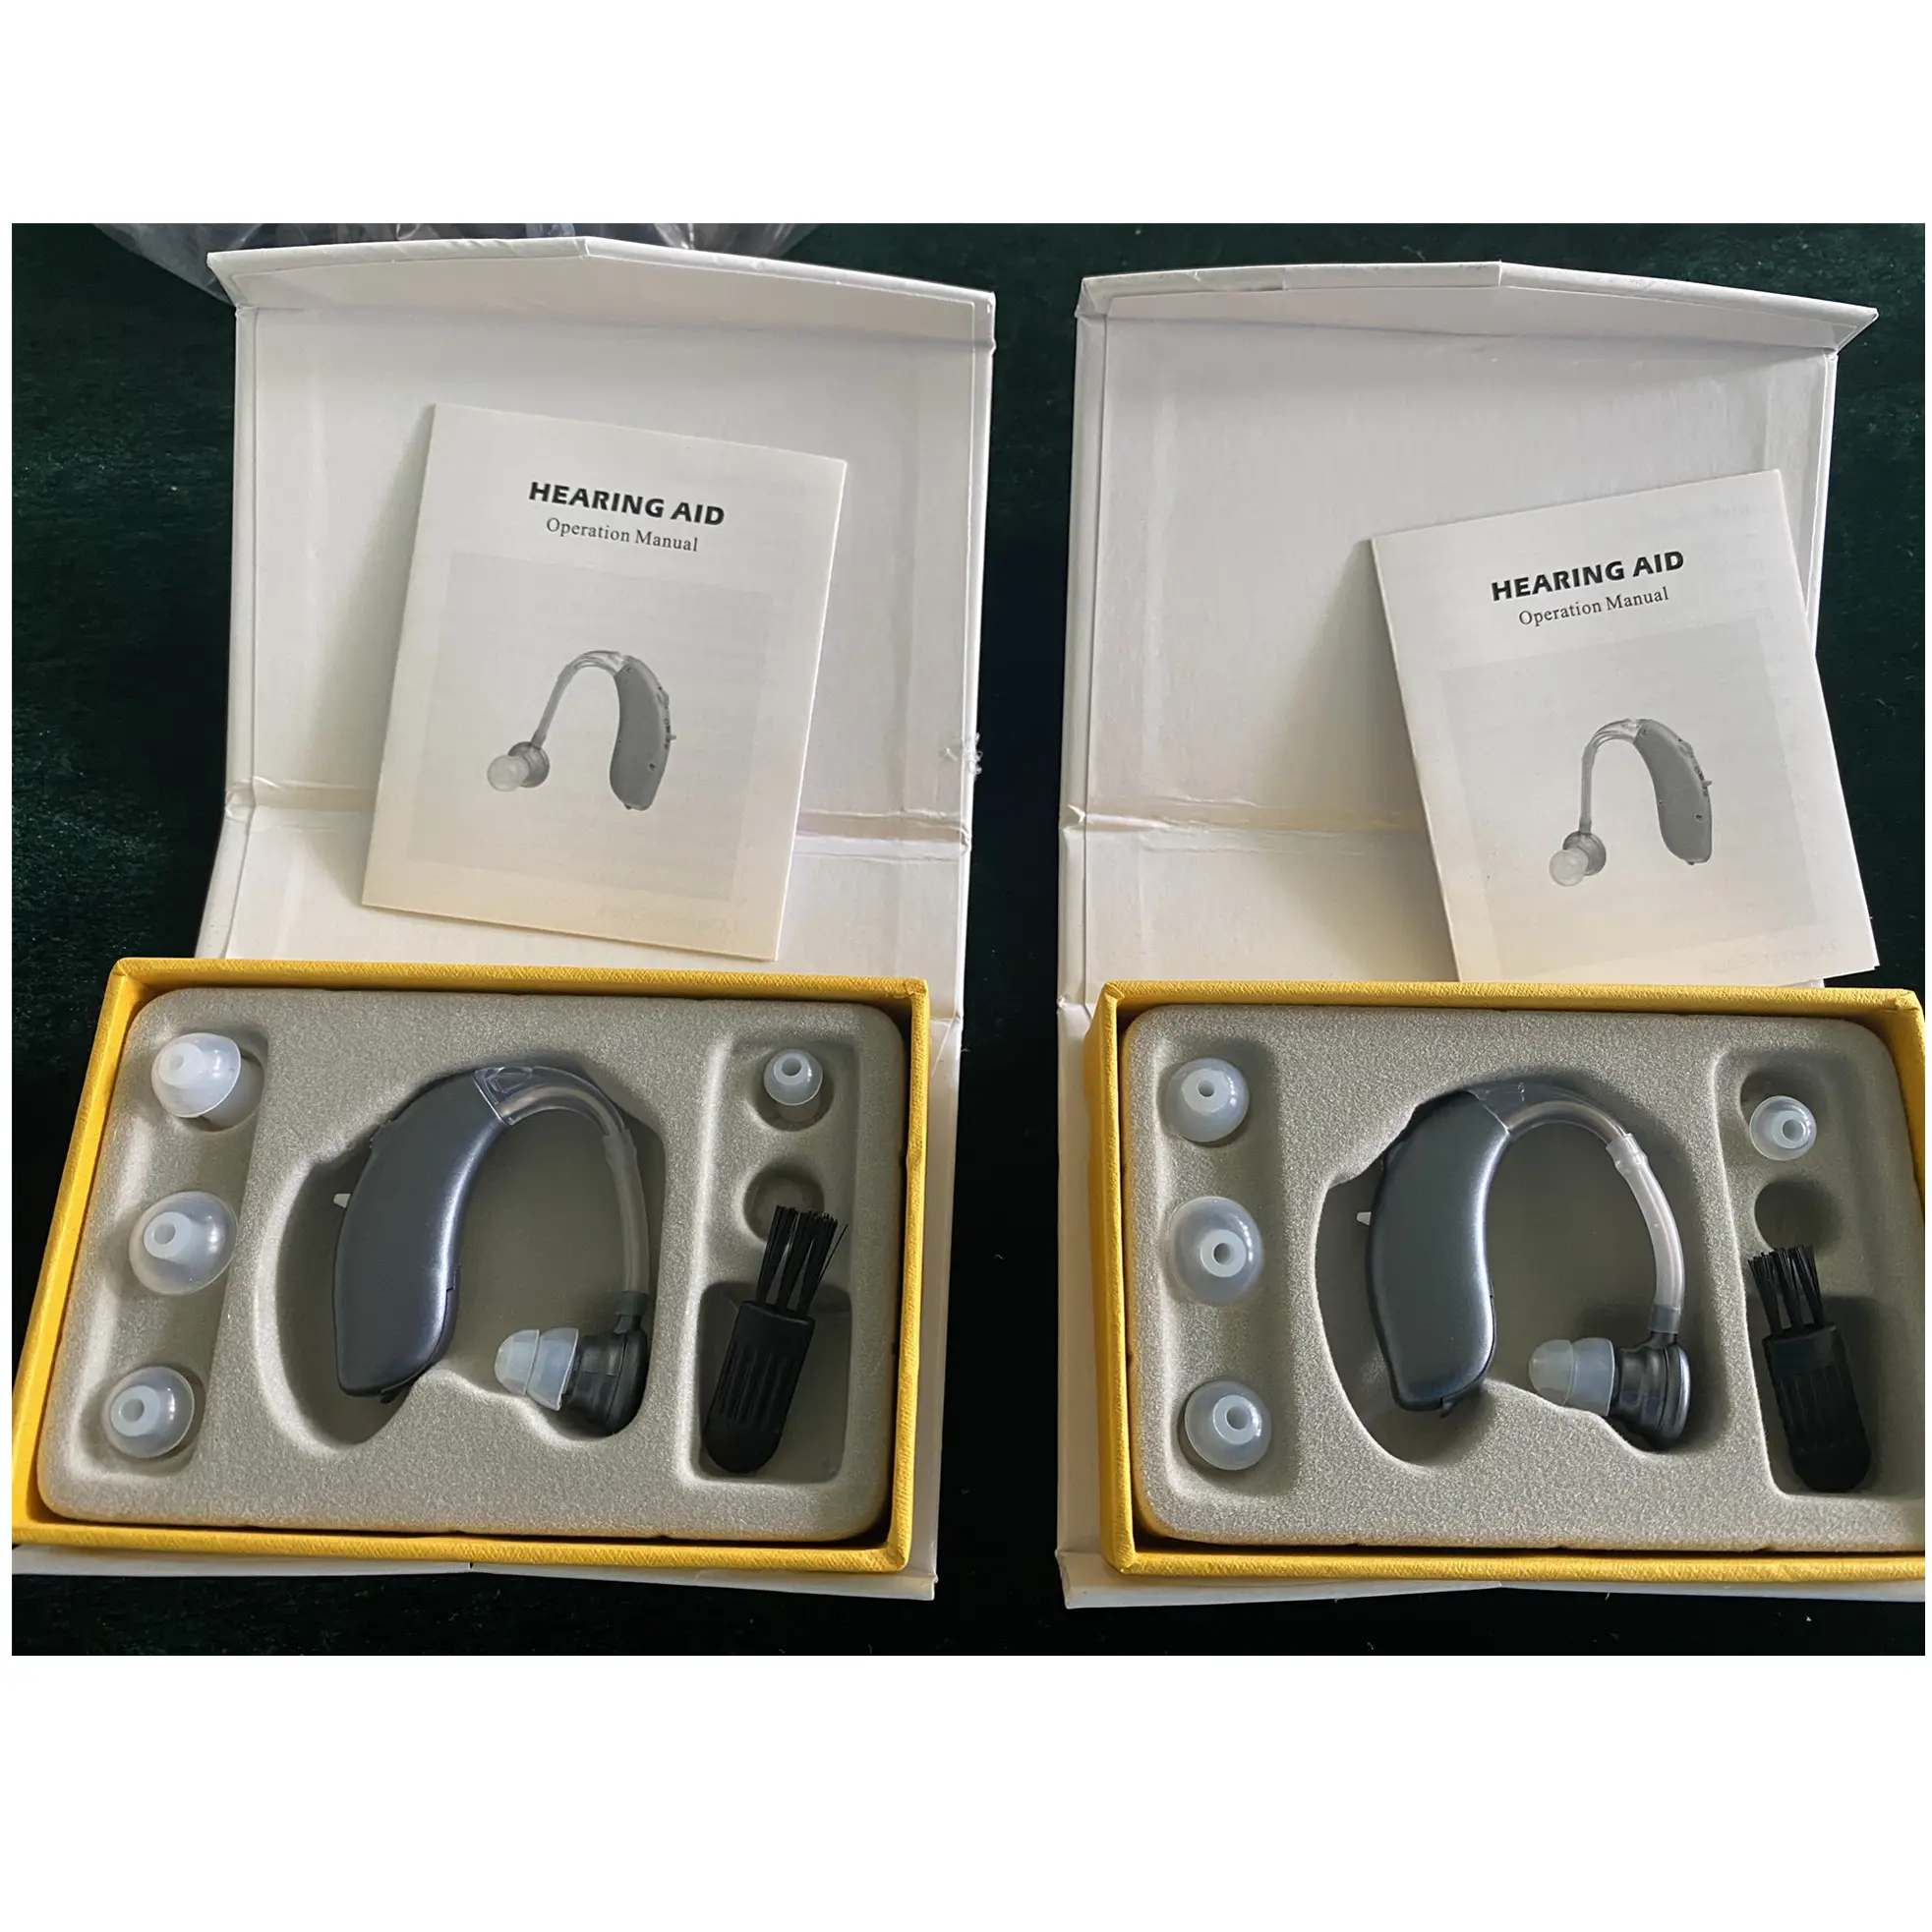 G20B BTE Hearing Aid Adjustable Sound Amplifier audifono para sordera HEARING AMPLIFIER LOW COST BEST FOR SALE